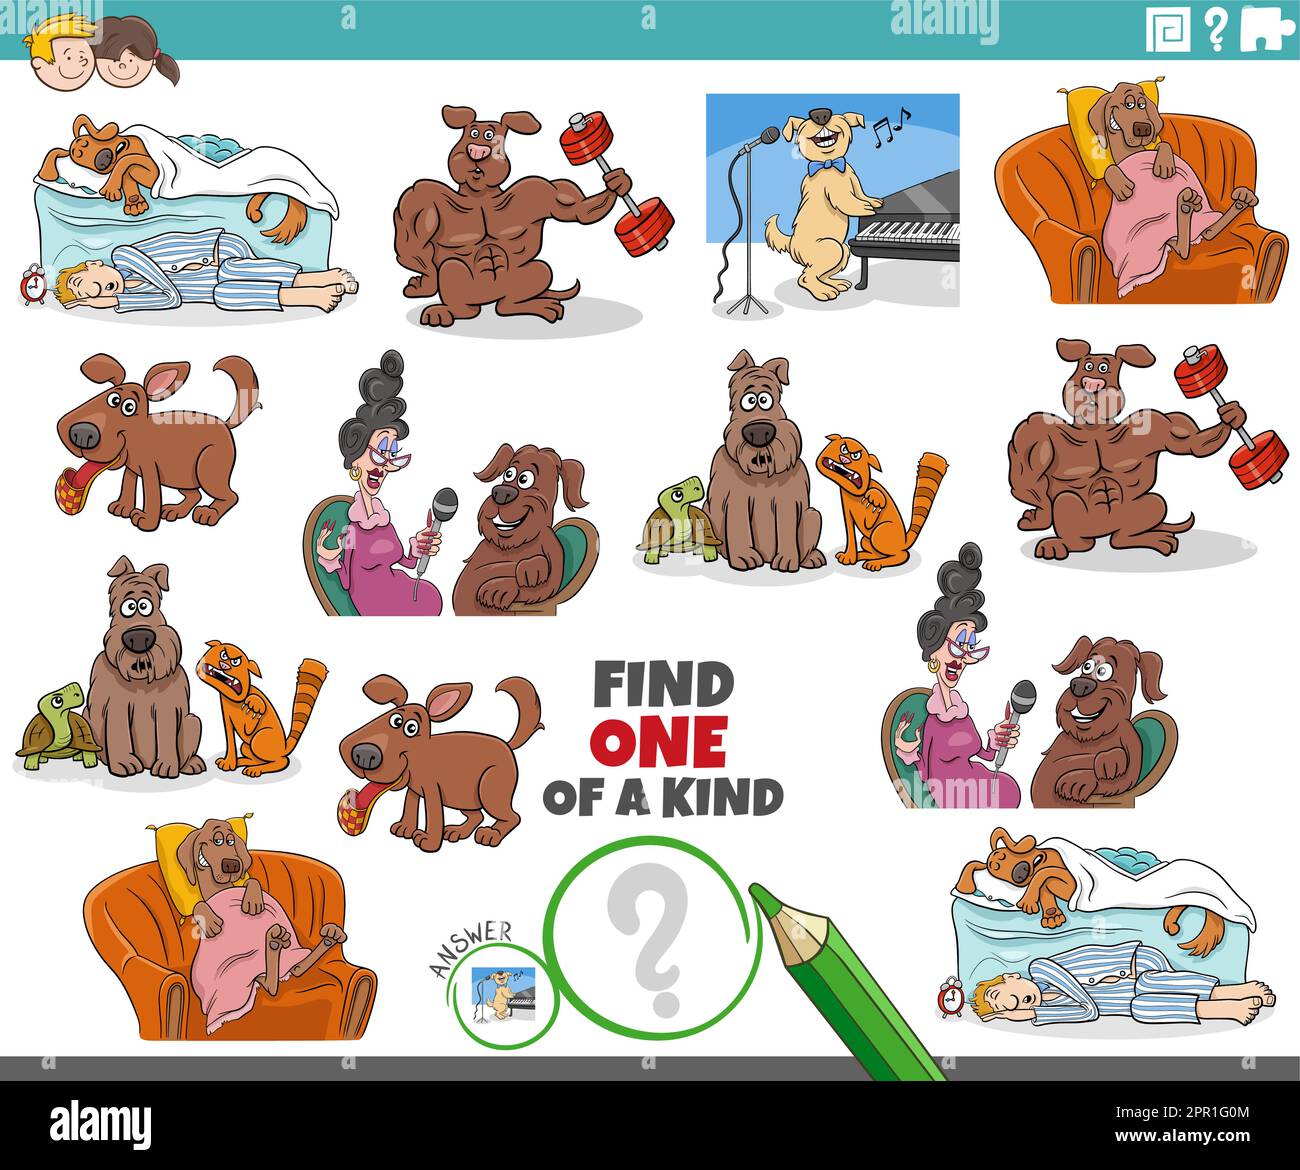 one of a kind activity with funny cartoon dogs Stock Vector